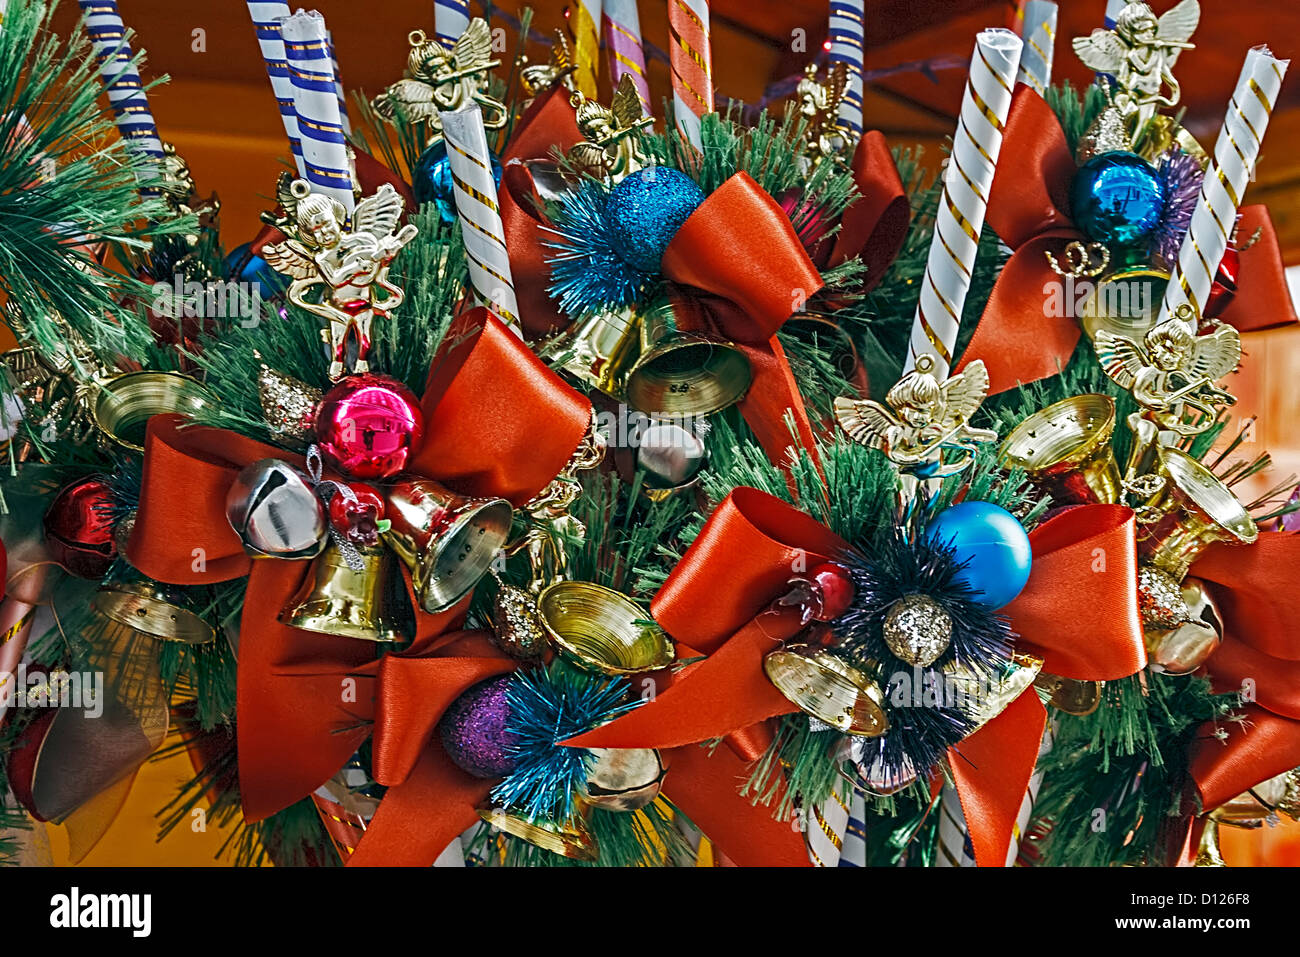 Christmas decorations with pine branches, bows, candles and globes. Stock Photo